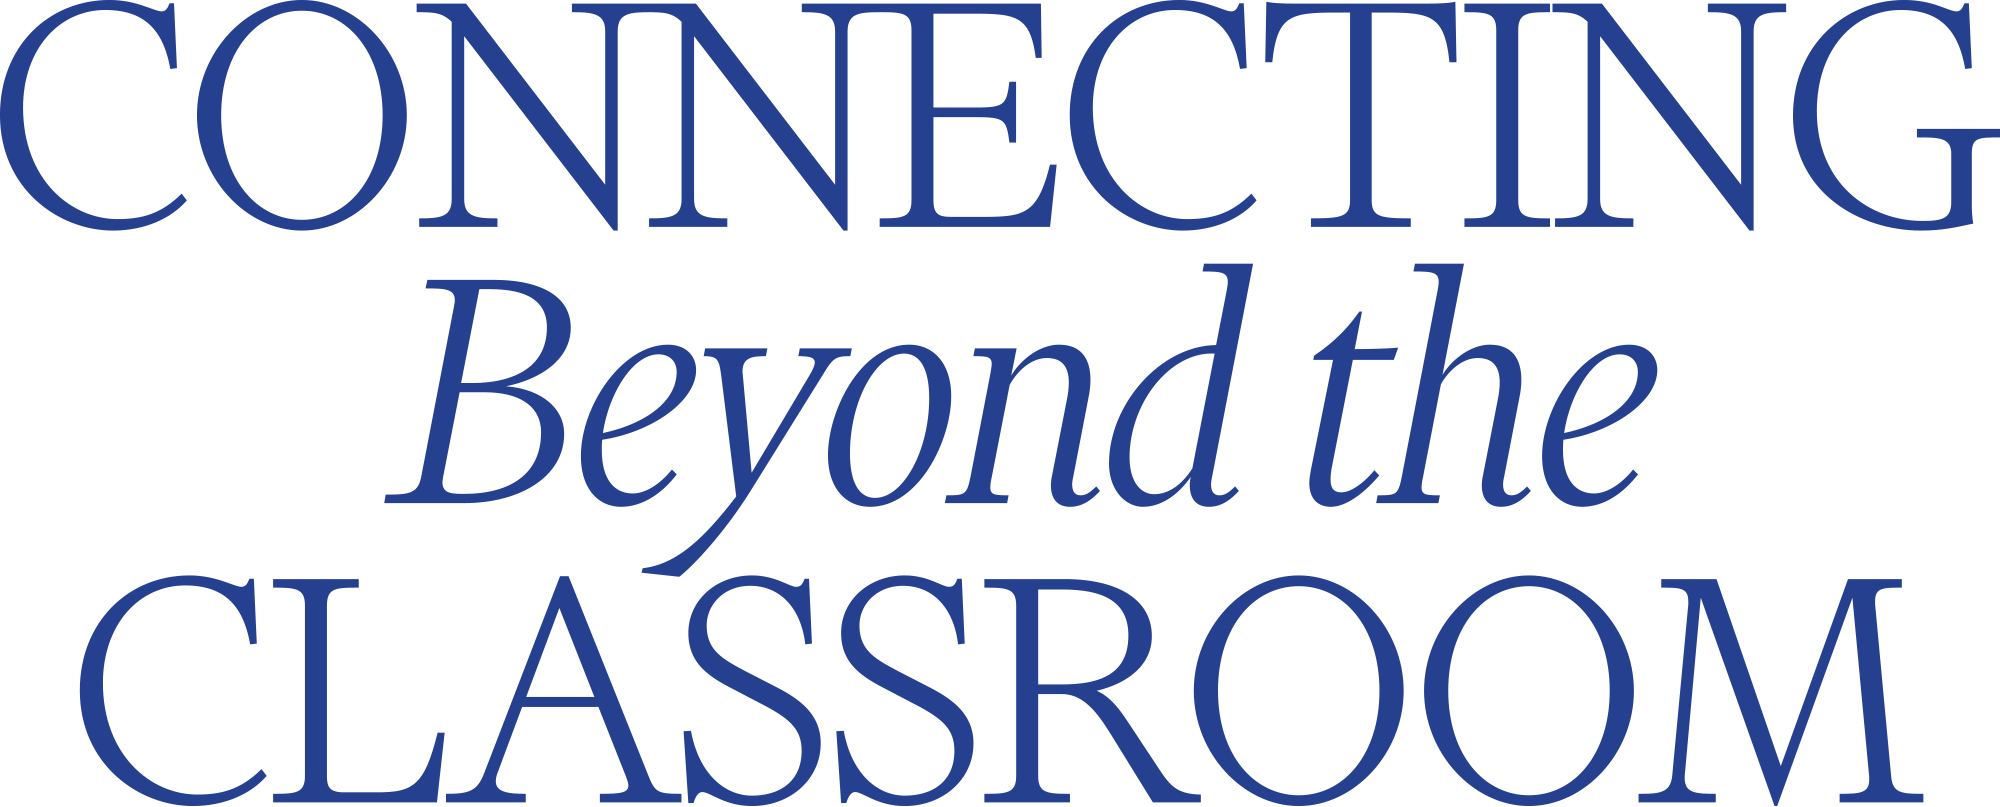 Connecting Beyond the Classroom